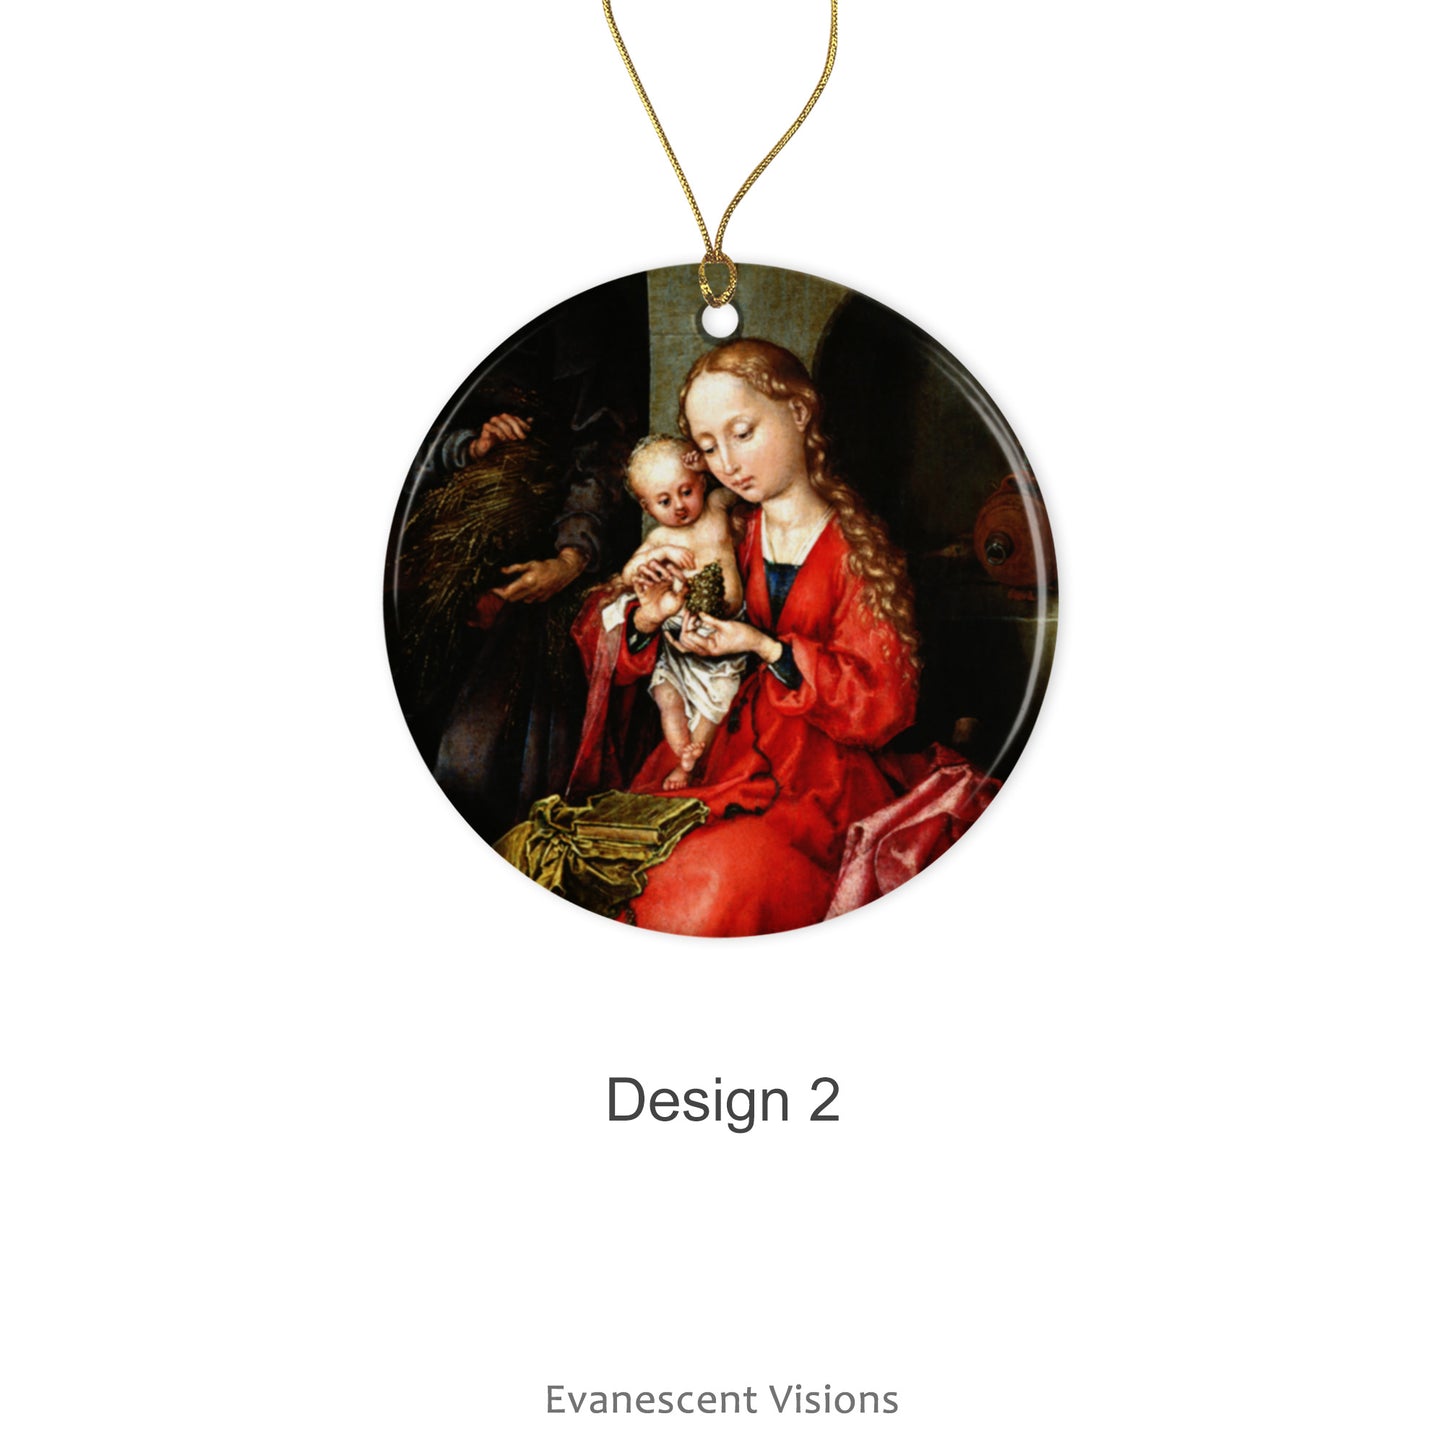 Ceramic Christmas ornament with detail of the painting 'The Holy Family' by Martin Schongauer